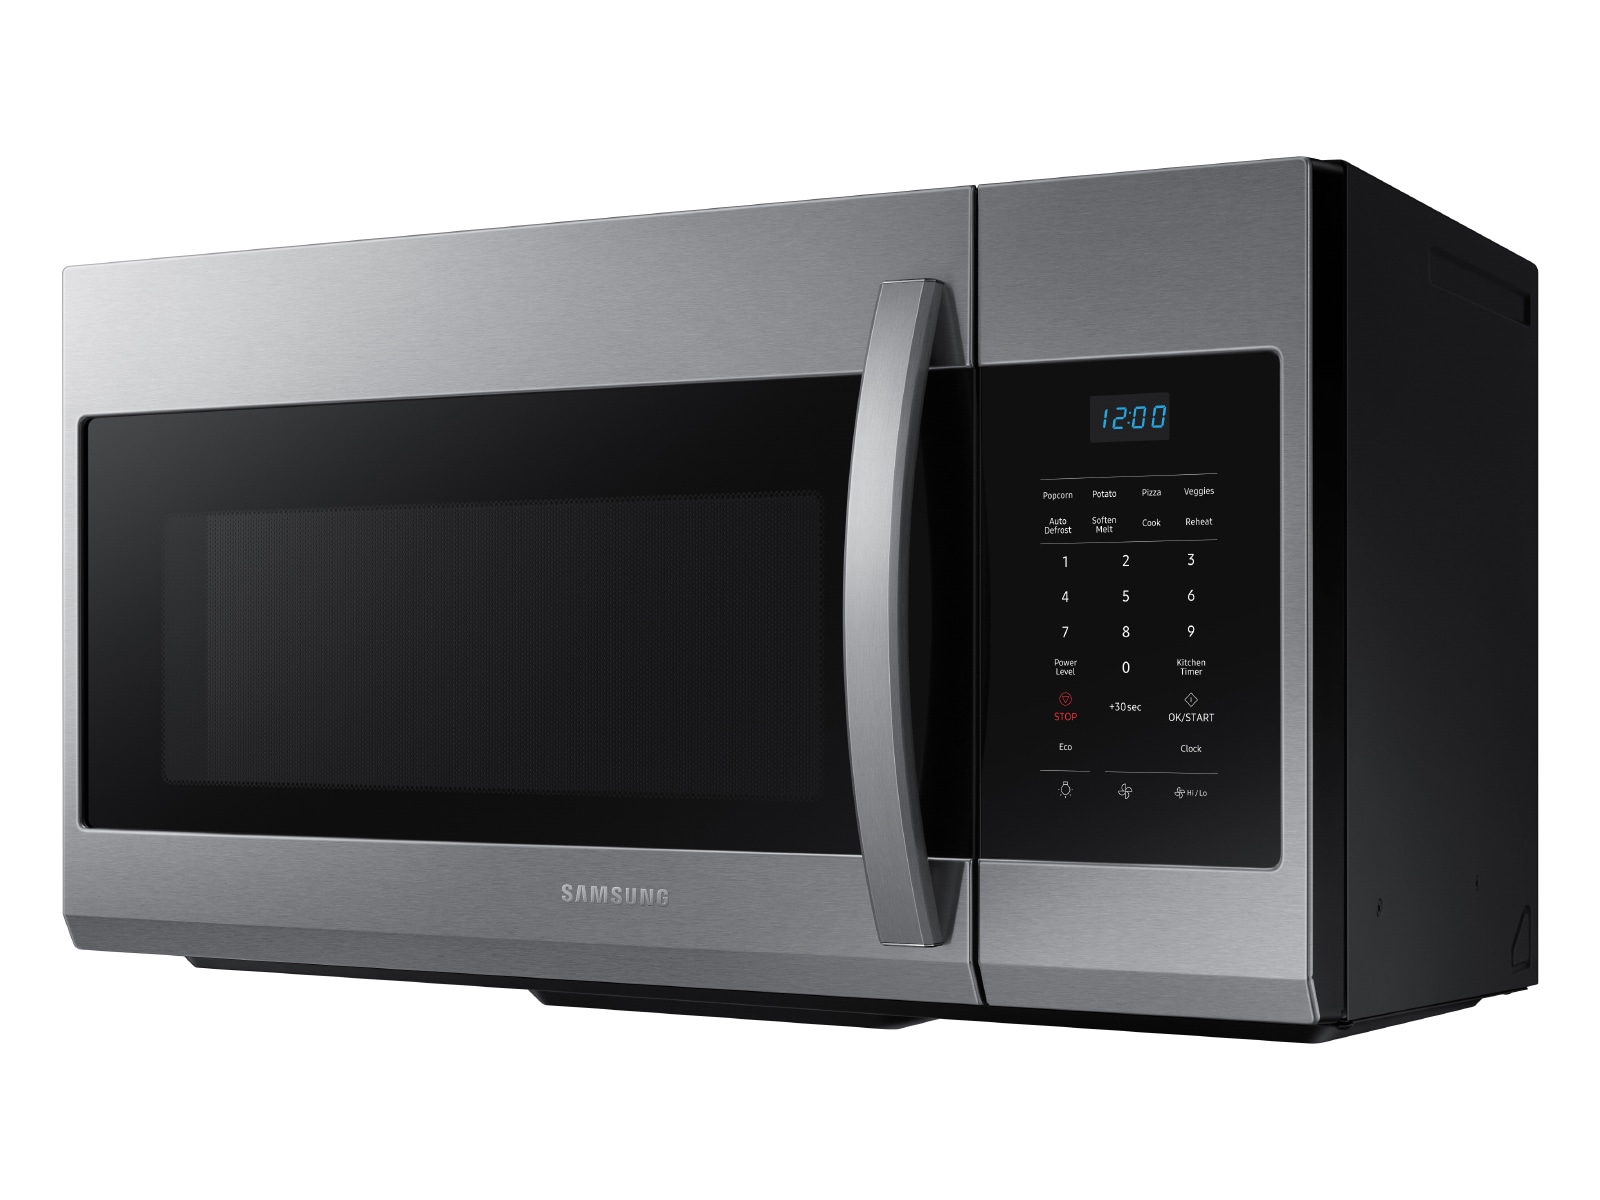 Samsung MC17T8000CS 1.7 Cu. ft. Stainless Steel Over The Range Convection Microwave